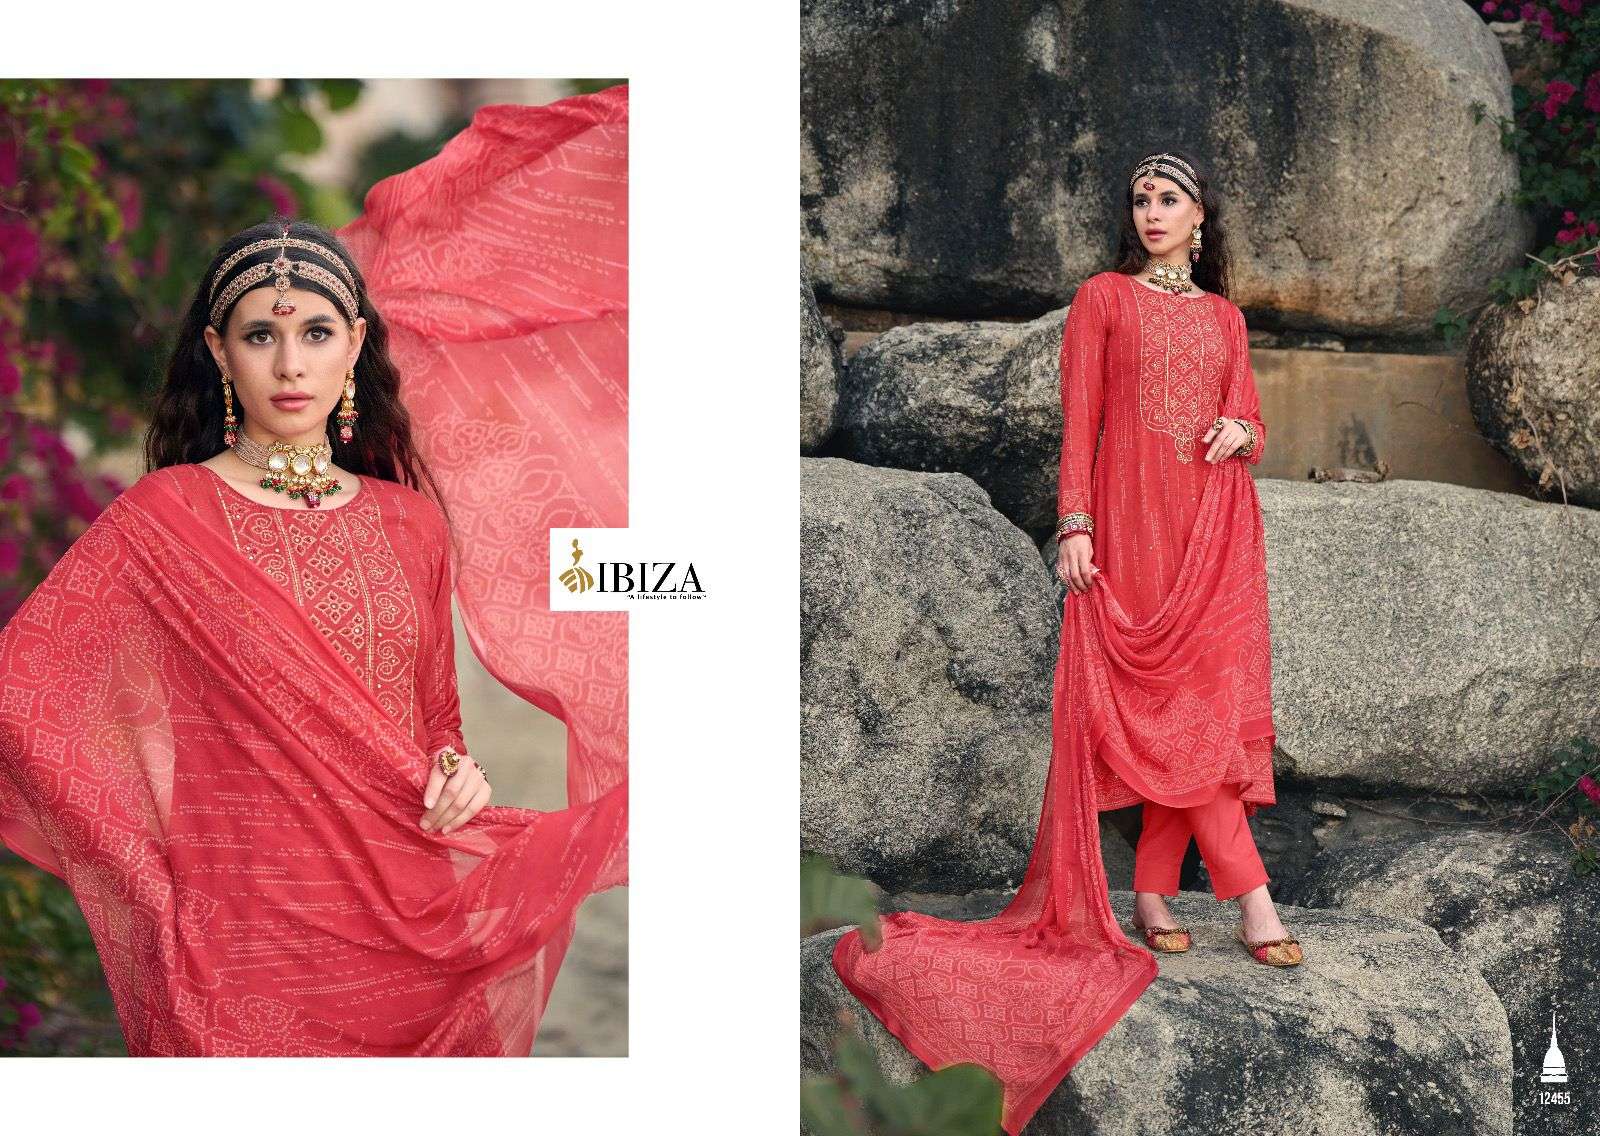 Sawera By Ibiza 12452 To 12459 Series Beautiful Suits Colorful Stylish Fancy Casual Wear & Ethnic Wear Pure Bemberg Muslin Dresses At Wholesale Price